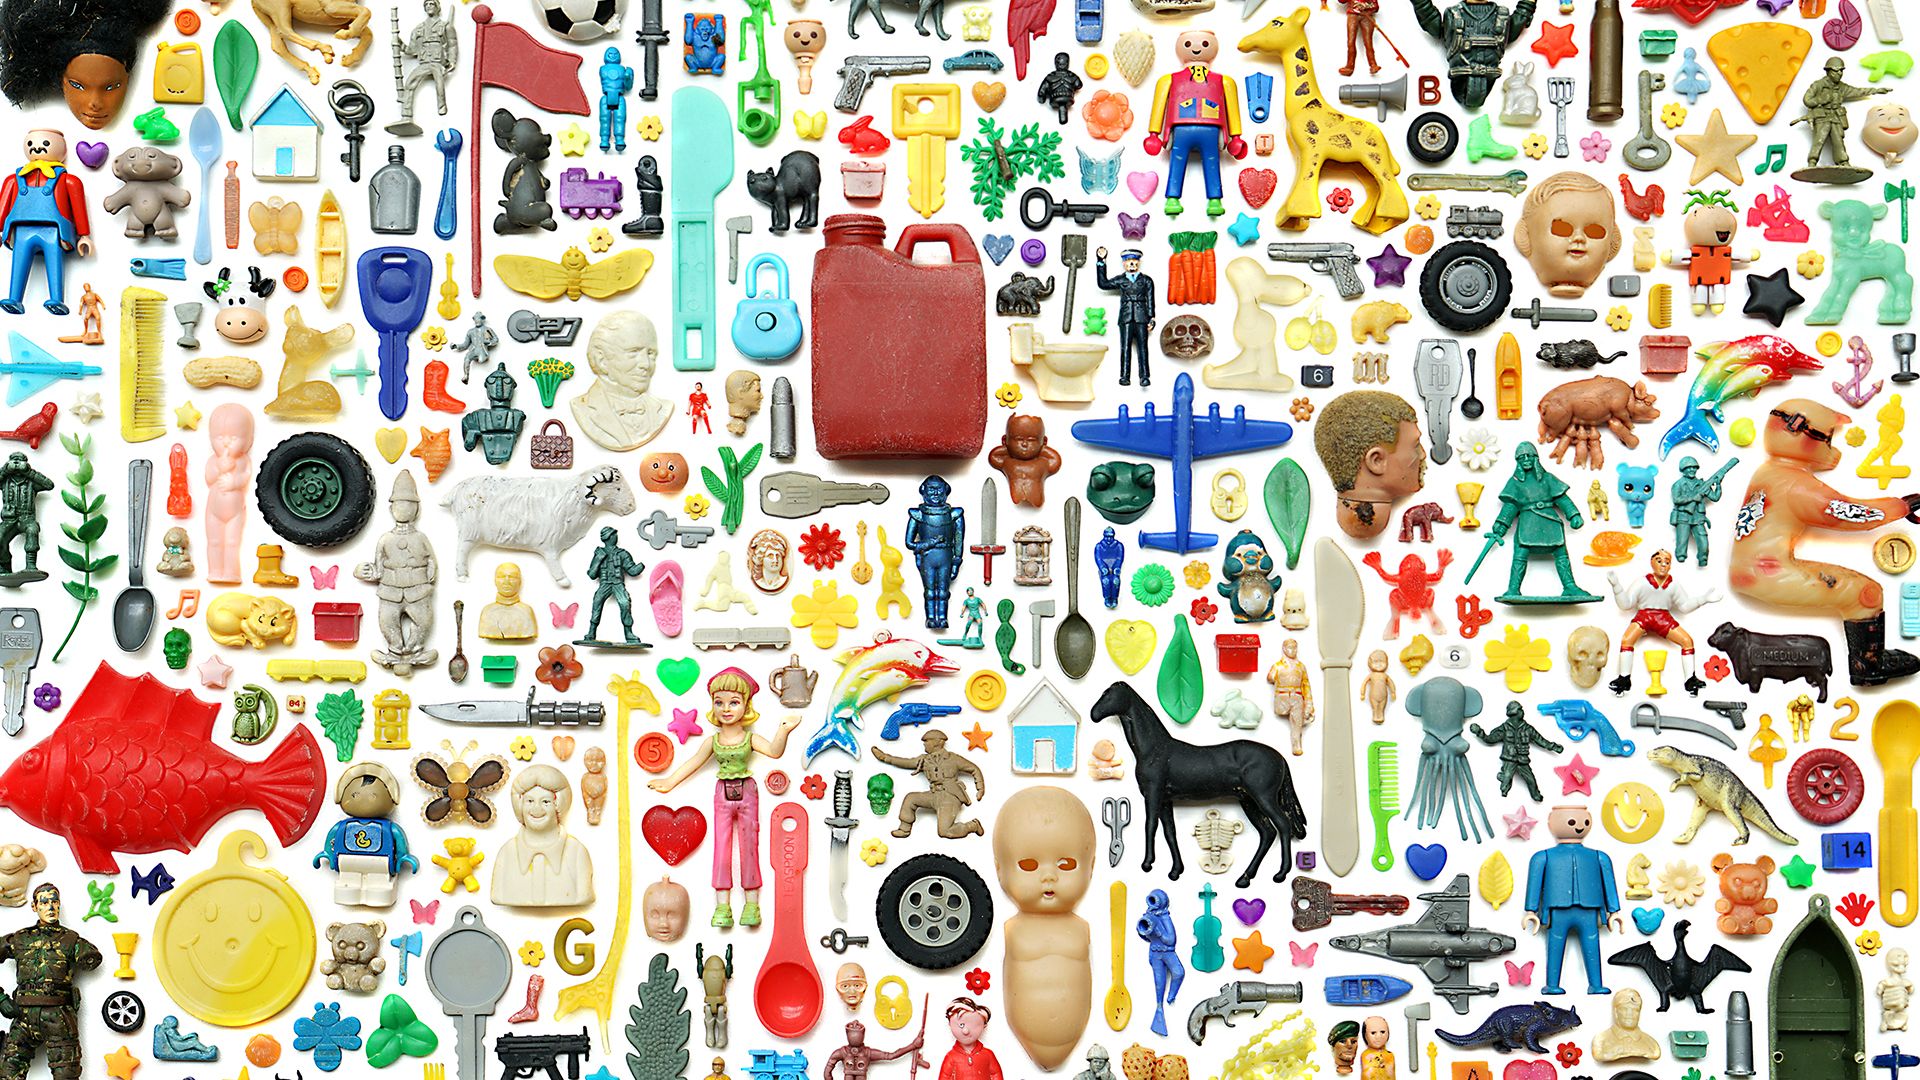 Image of many assorted, small plastic objects like doll heads, planes, eating utensils, arranged into a montage.